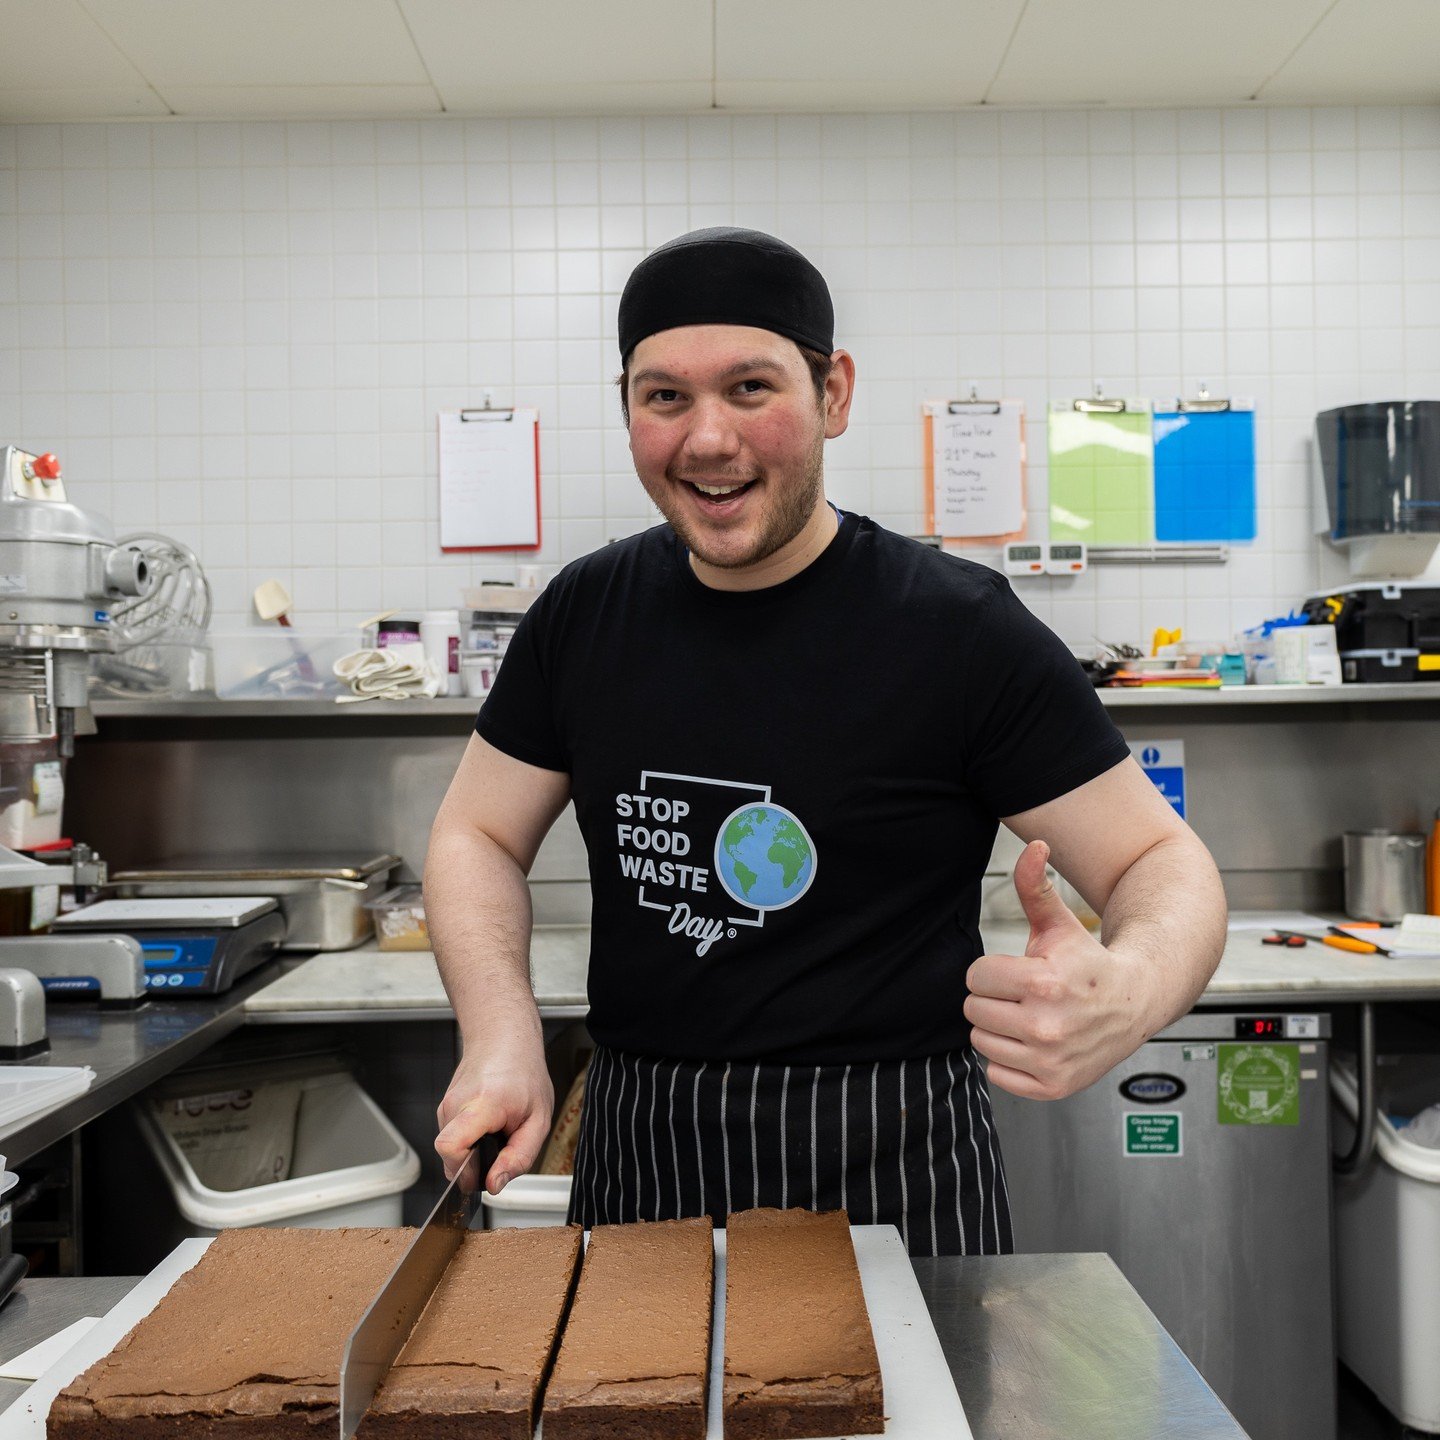 SNEAK PEAK! Behind the scenes our chefs have been busy prepping for tomorrow. Chris getting pickled broccoli stalks ready and Avery baking some delicious coffee ground brownies! Join us tomorrow at Oliver's for #stopfoodwasteday.